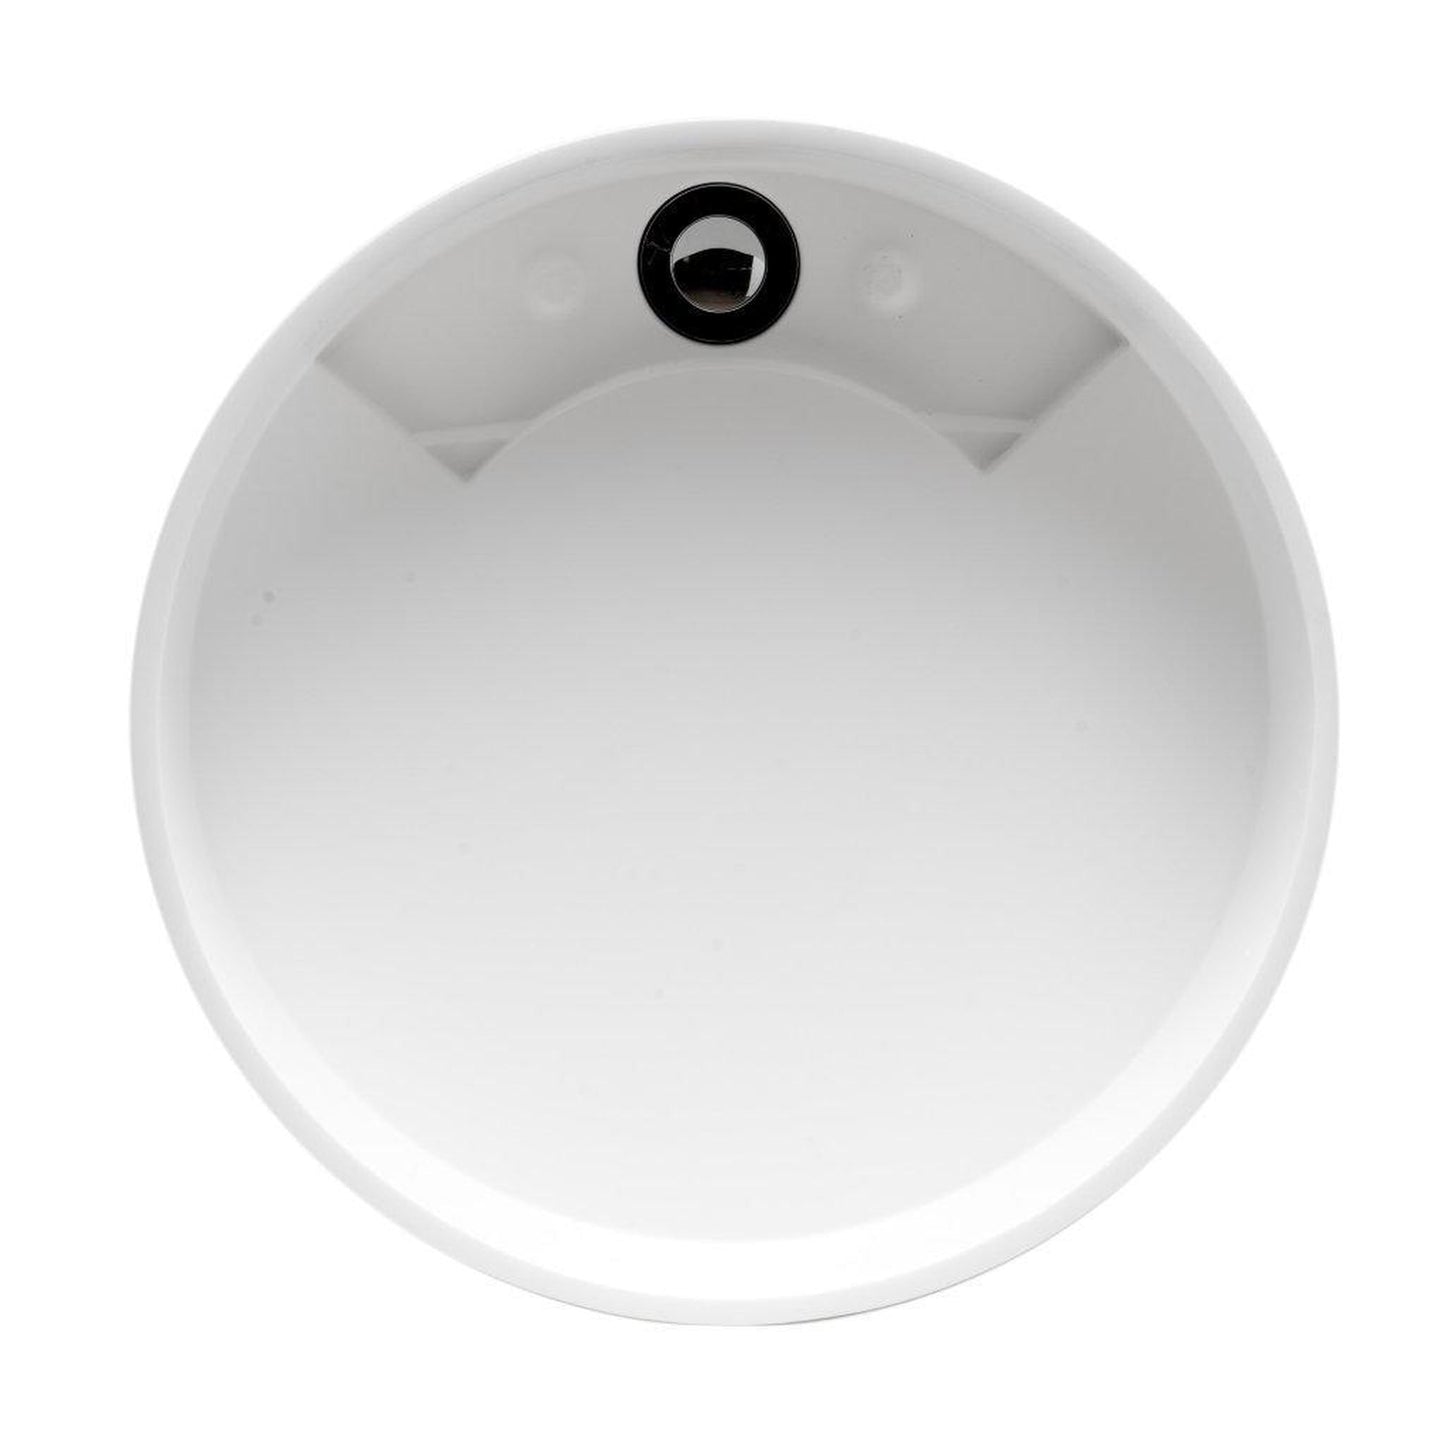 ALFI Brand ABRS15R 15" White Matte Above Mount Round Solid Surface Resin Bathroom Sink With Chrome Drain